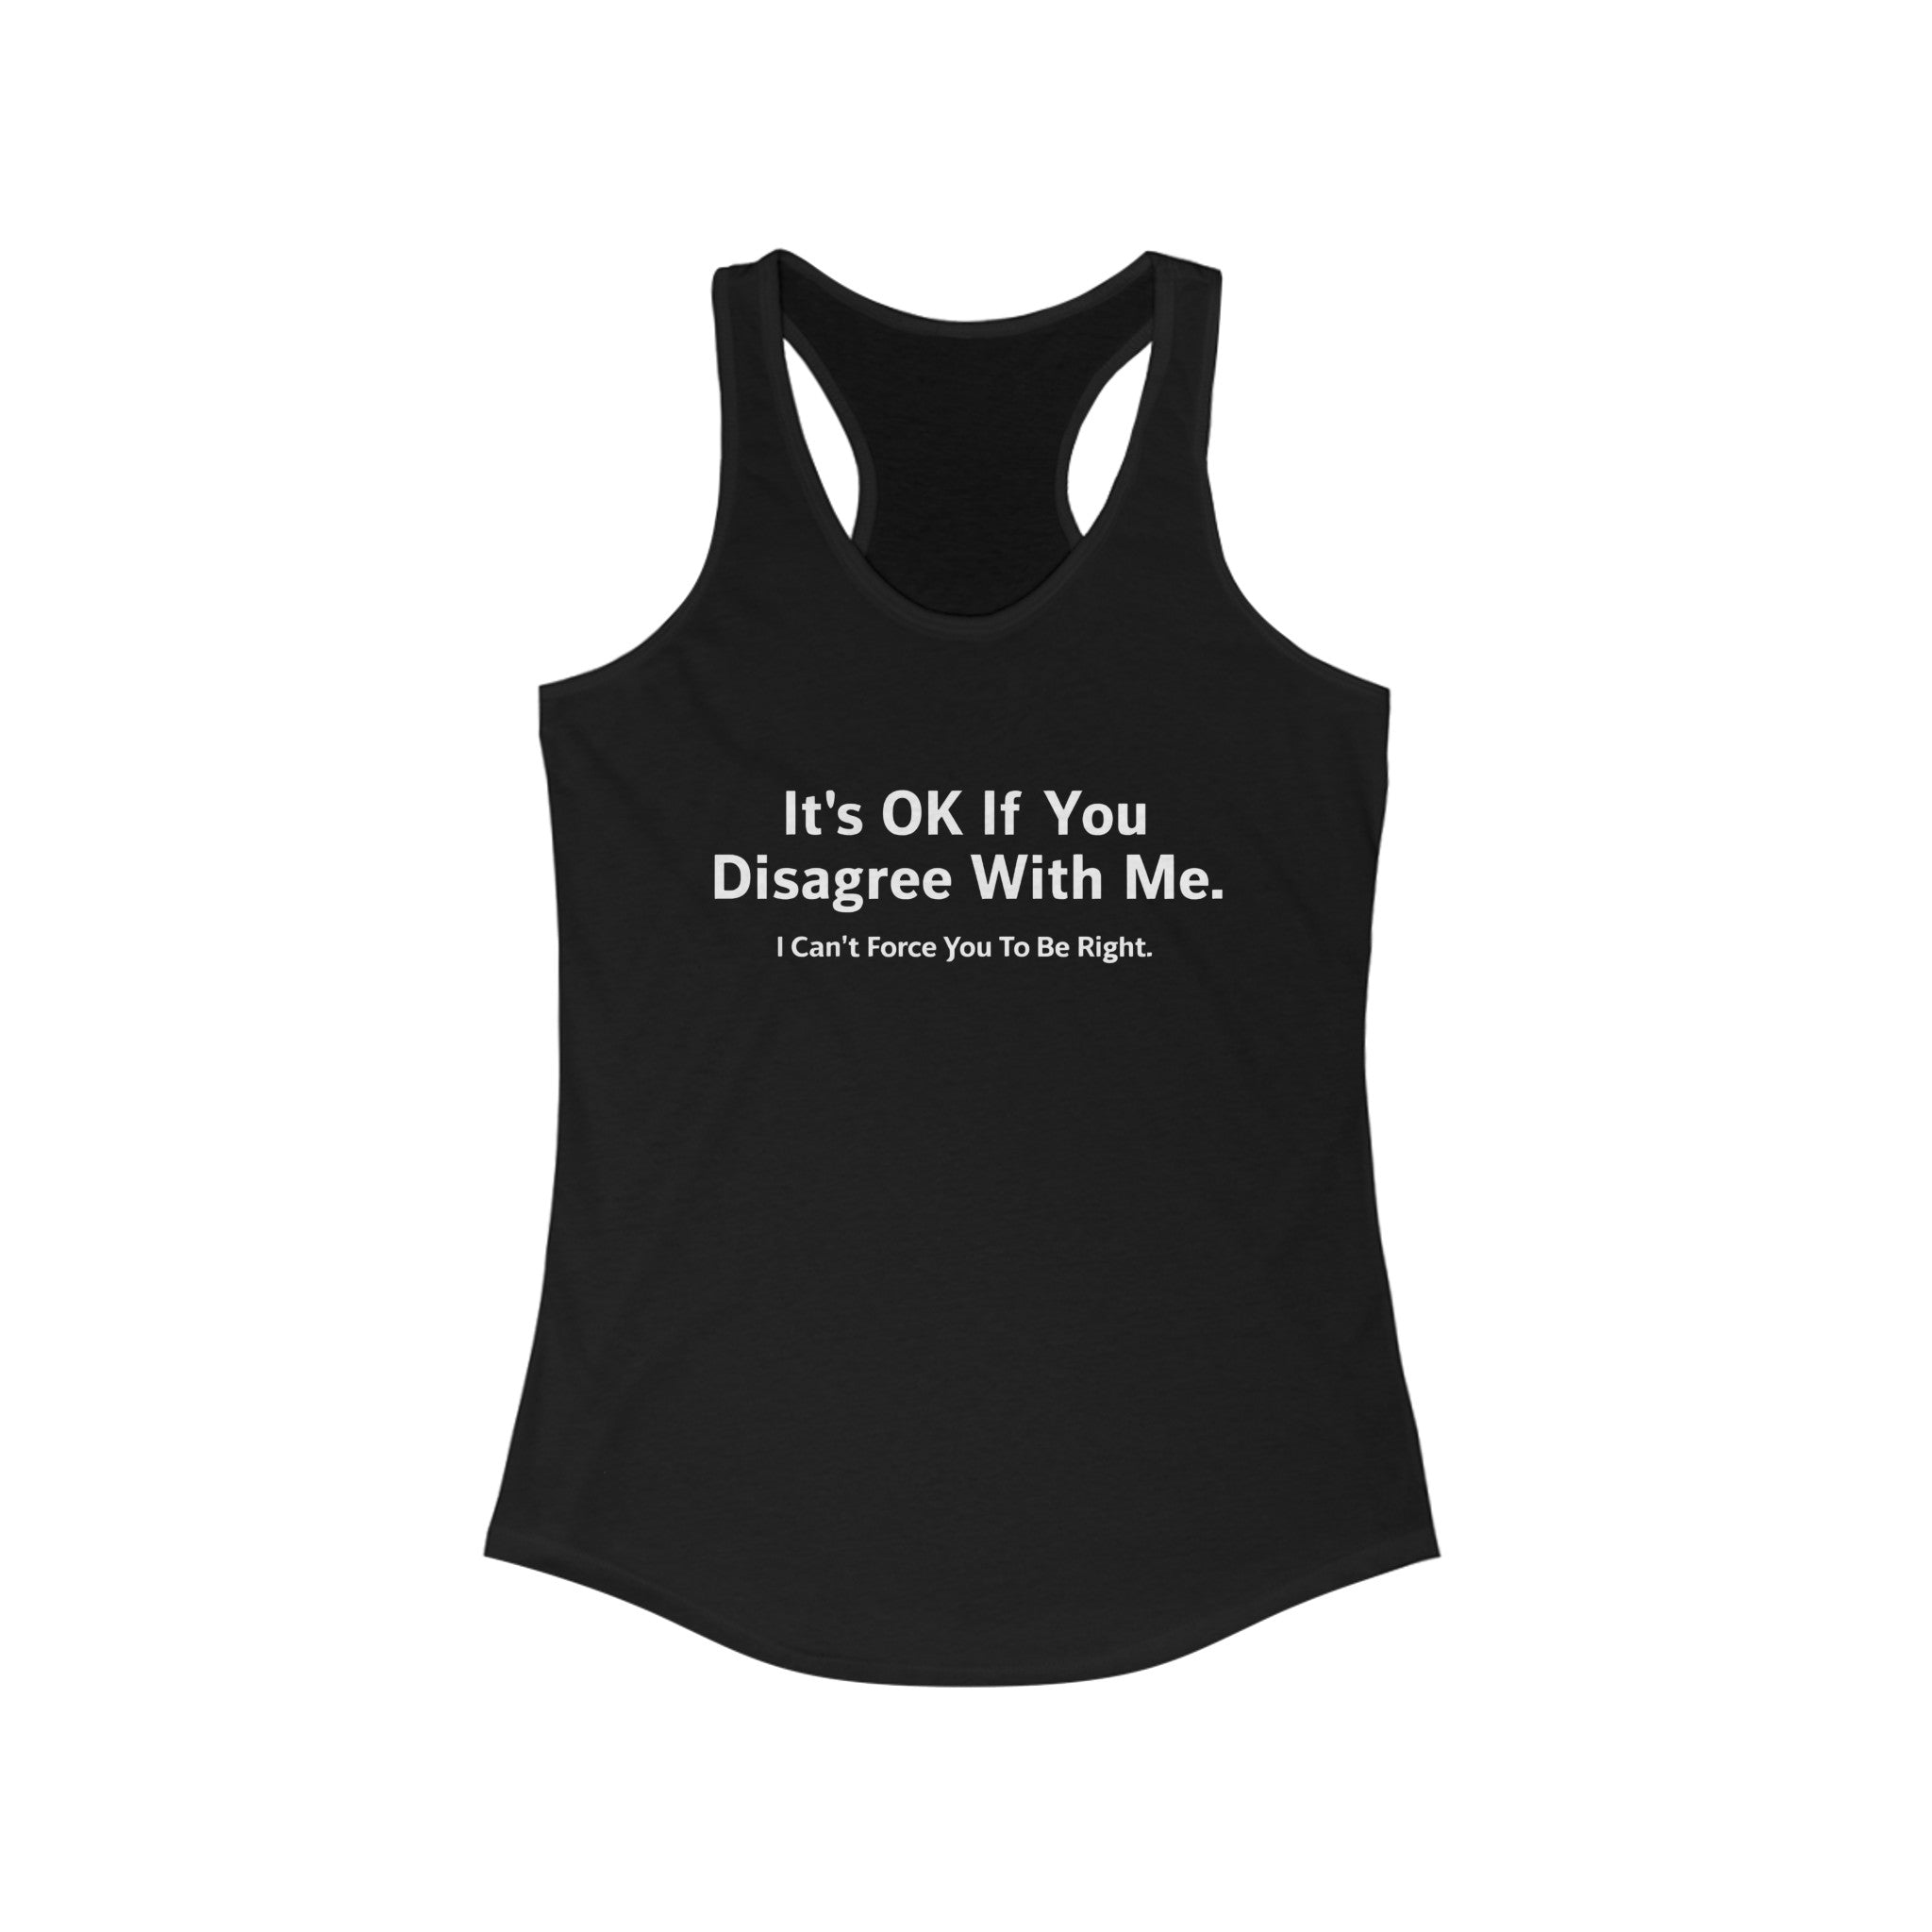 It's Ok If You Disagree With Me - Women's Racerback Tank